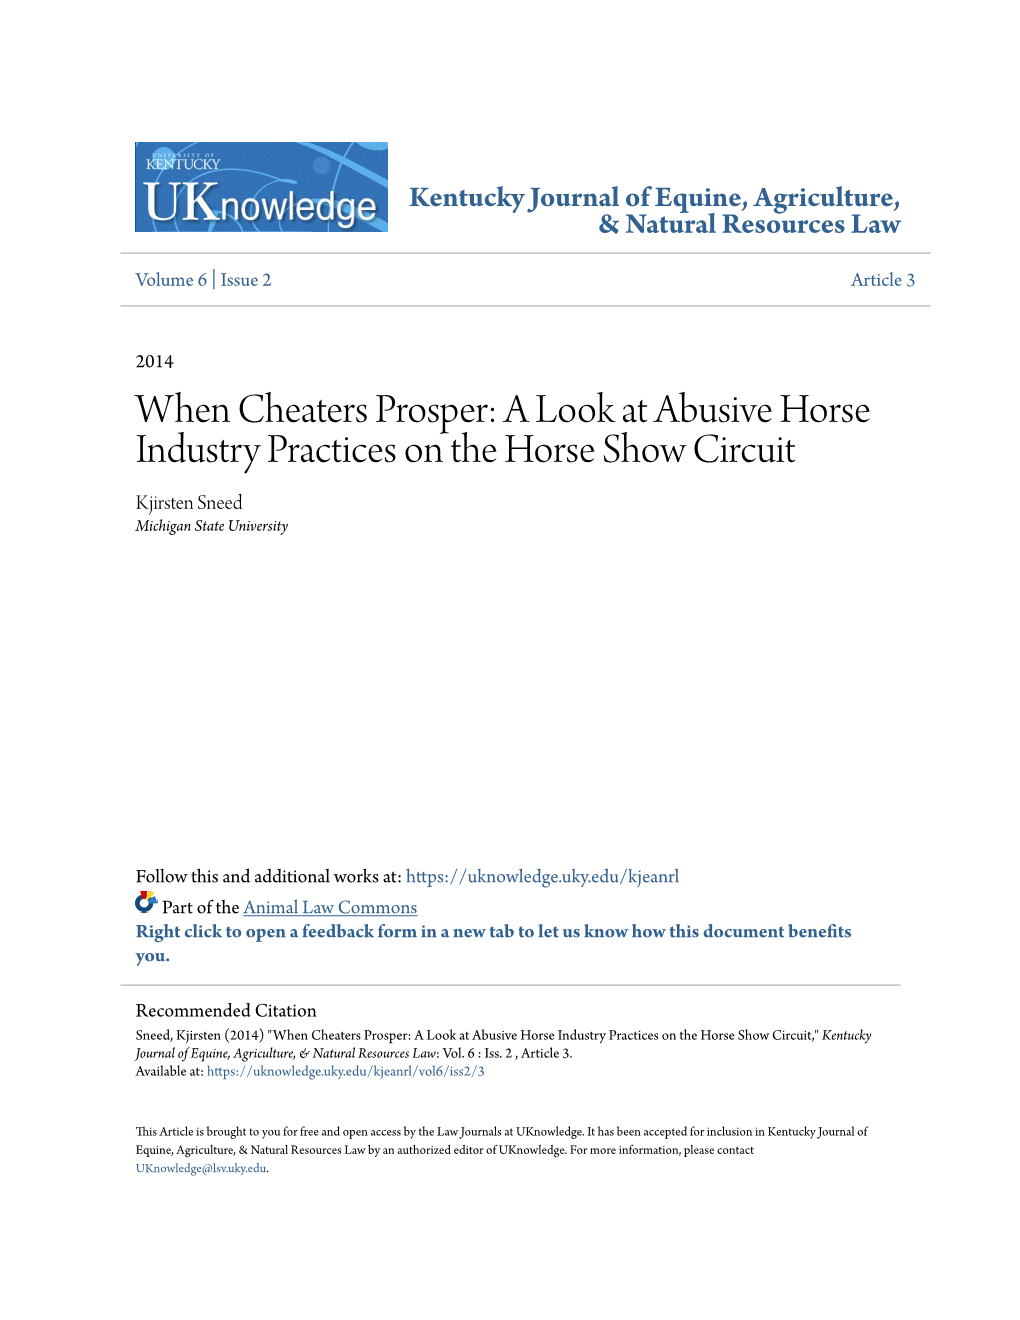 A Look at Abusive Horse Industry Practices on the Horse Show Circuit Kjirsten Sneed Michigan State University